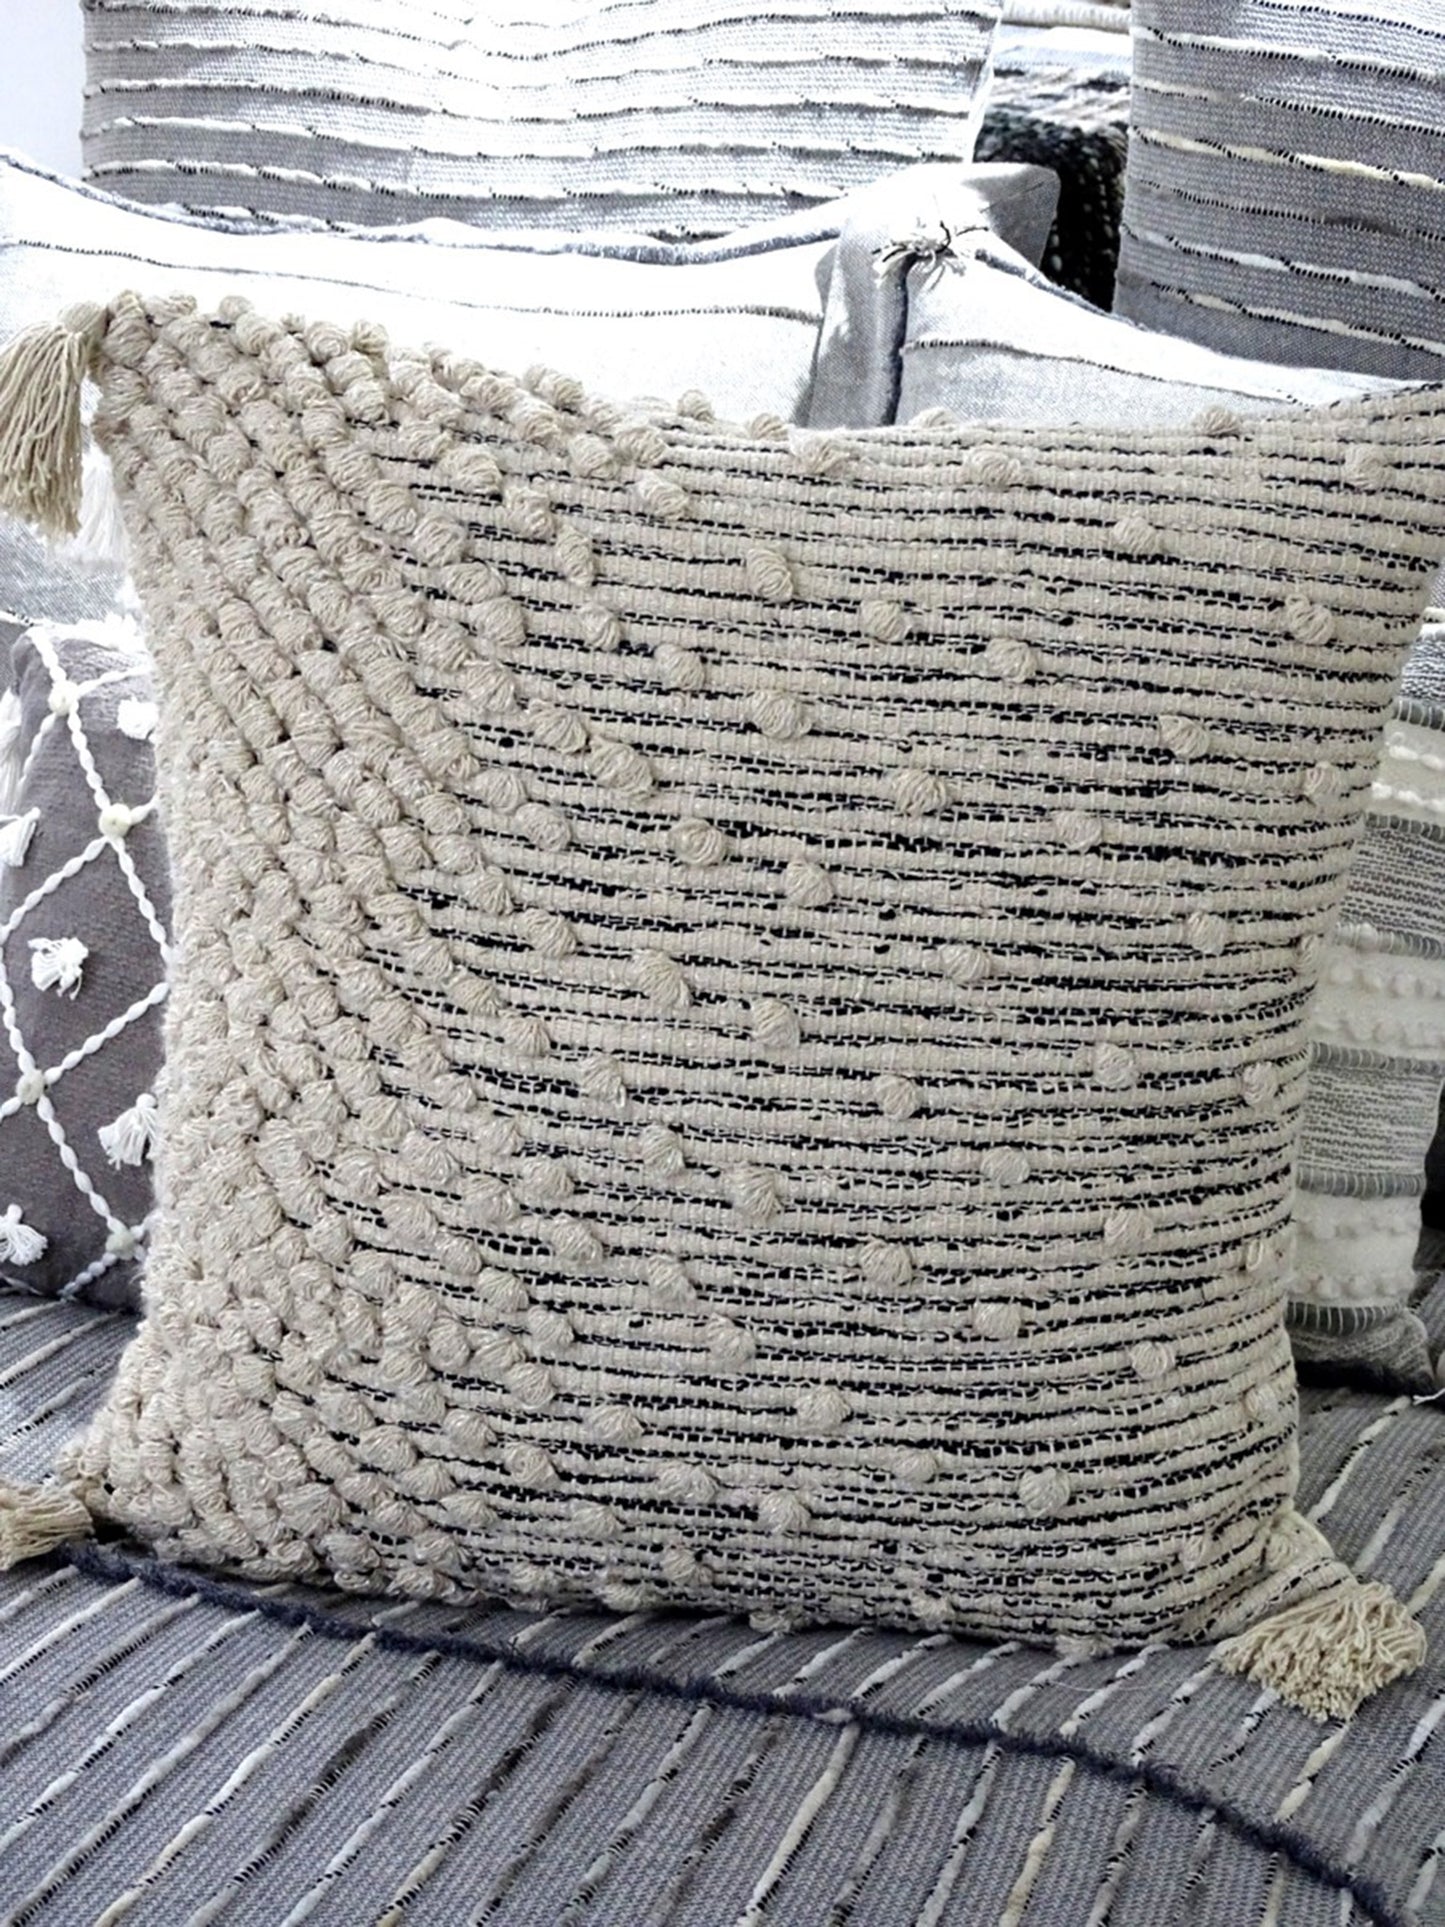 Throw Pillow Cover Beige Woven 20" X 20" with Insert